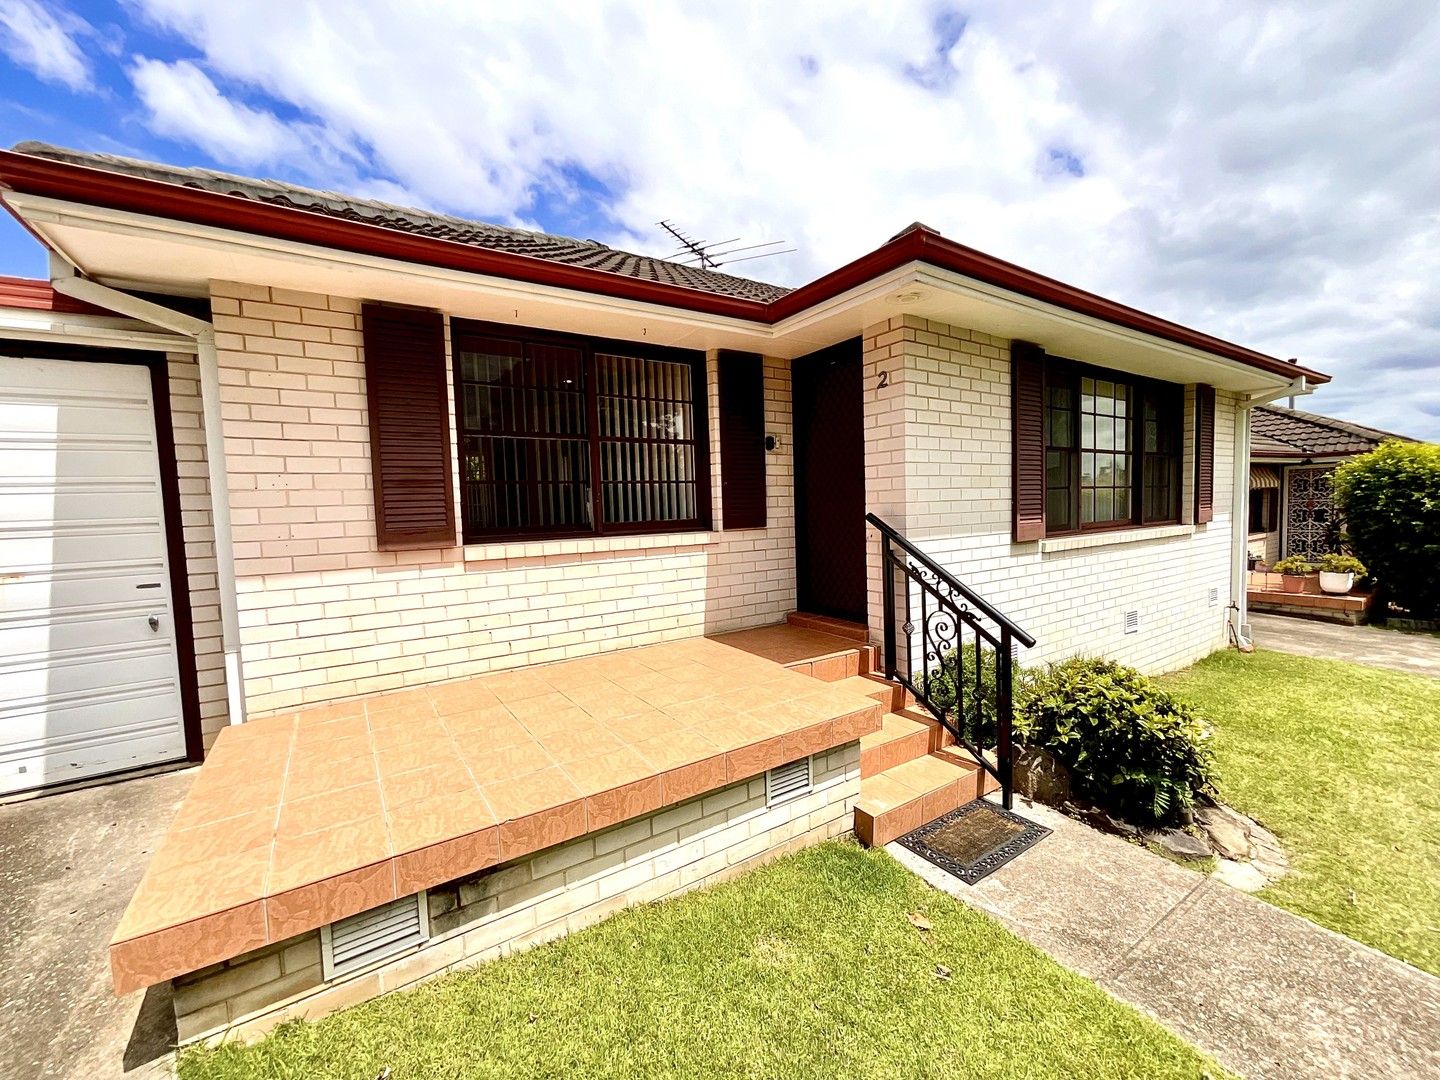 2 bedrooms Villa in 2/21 Mutual Road MORTDALE NSW, 2223